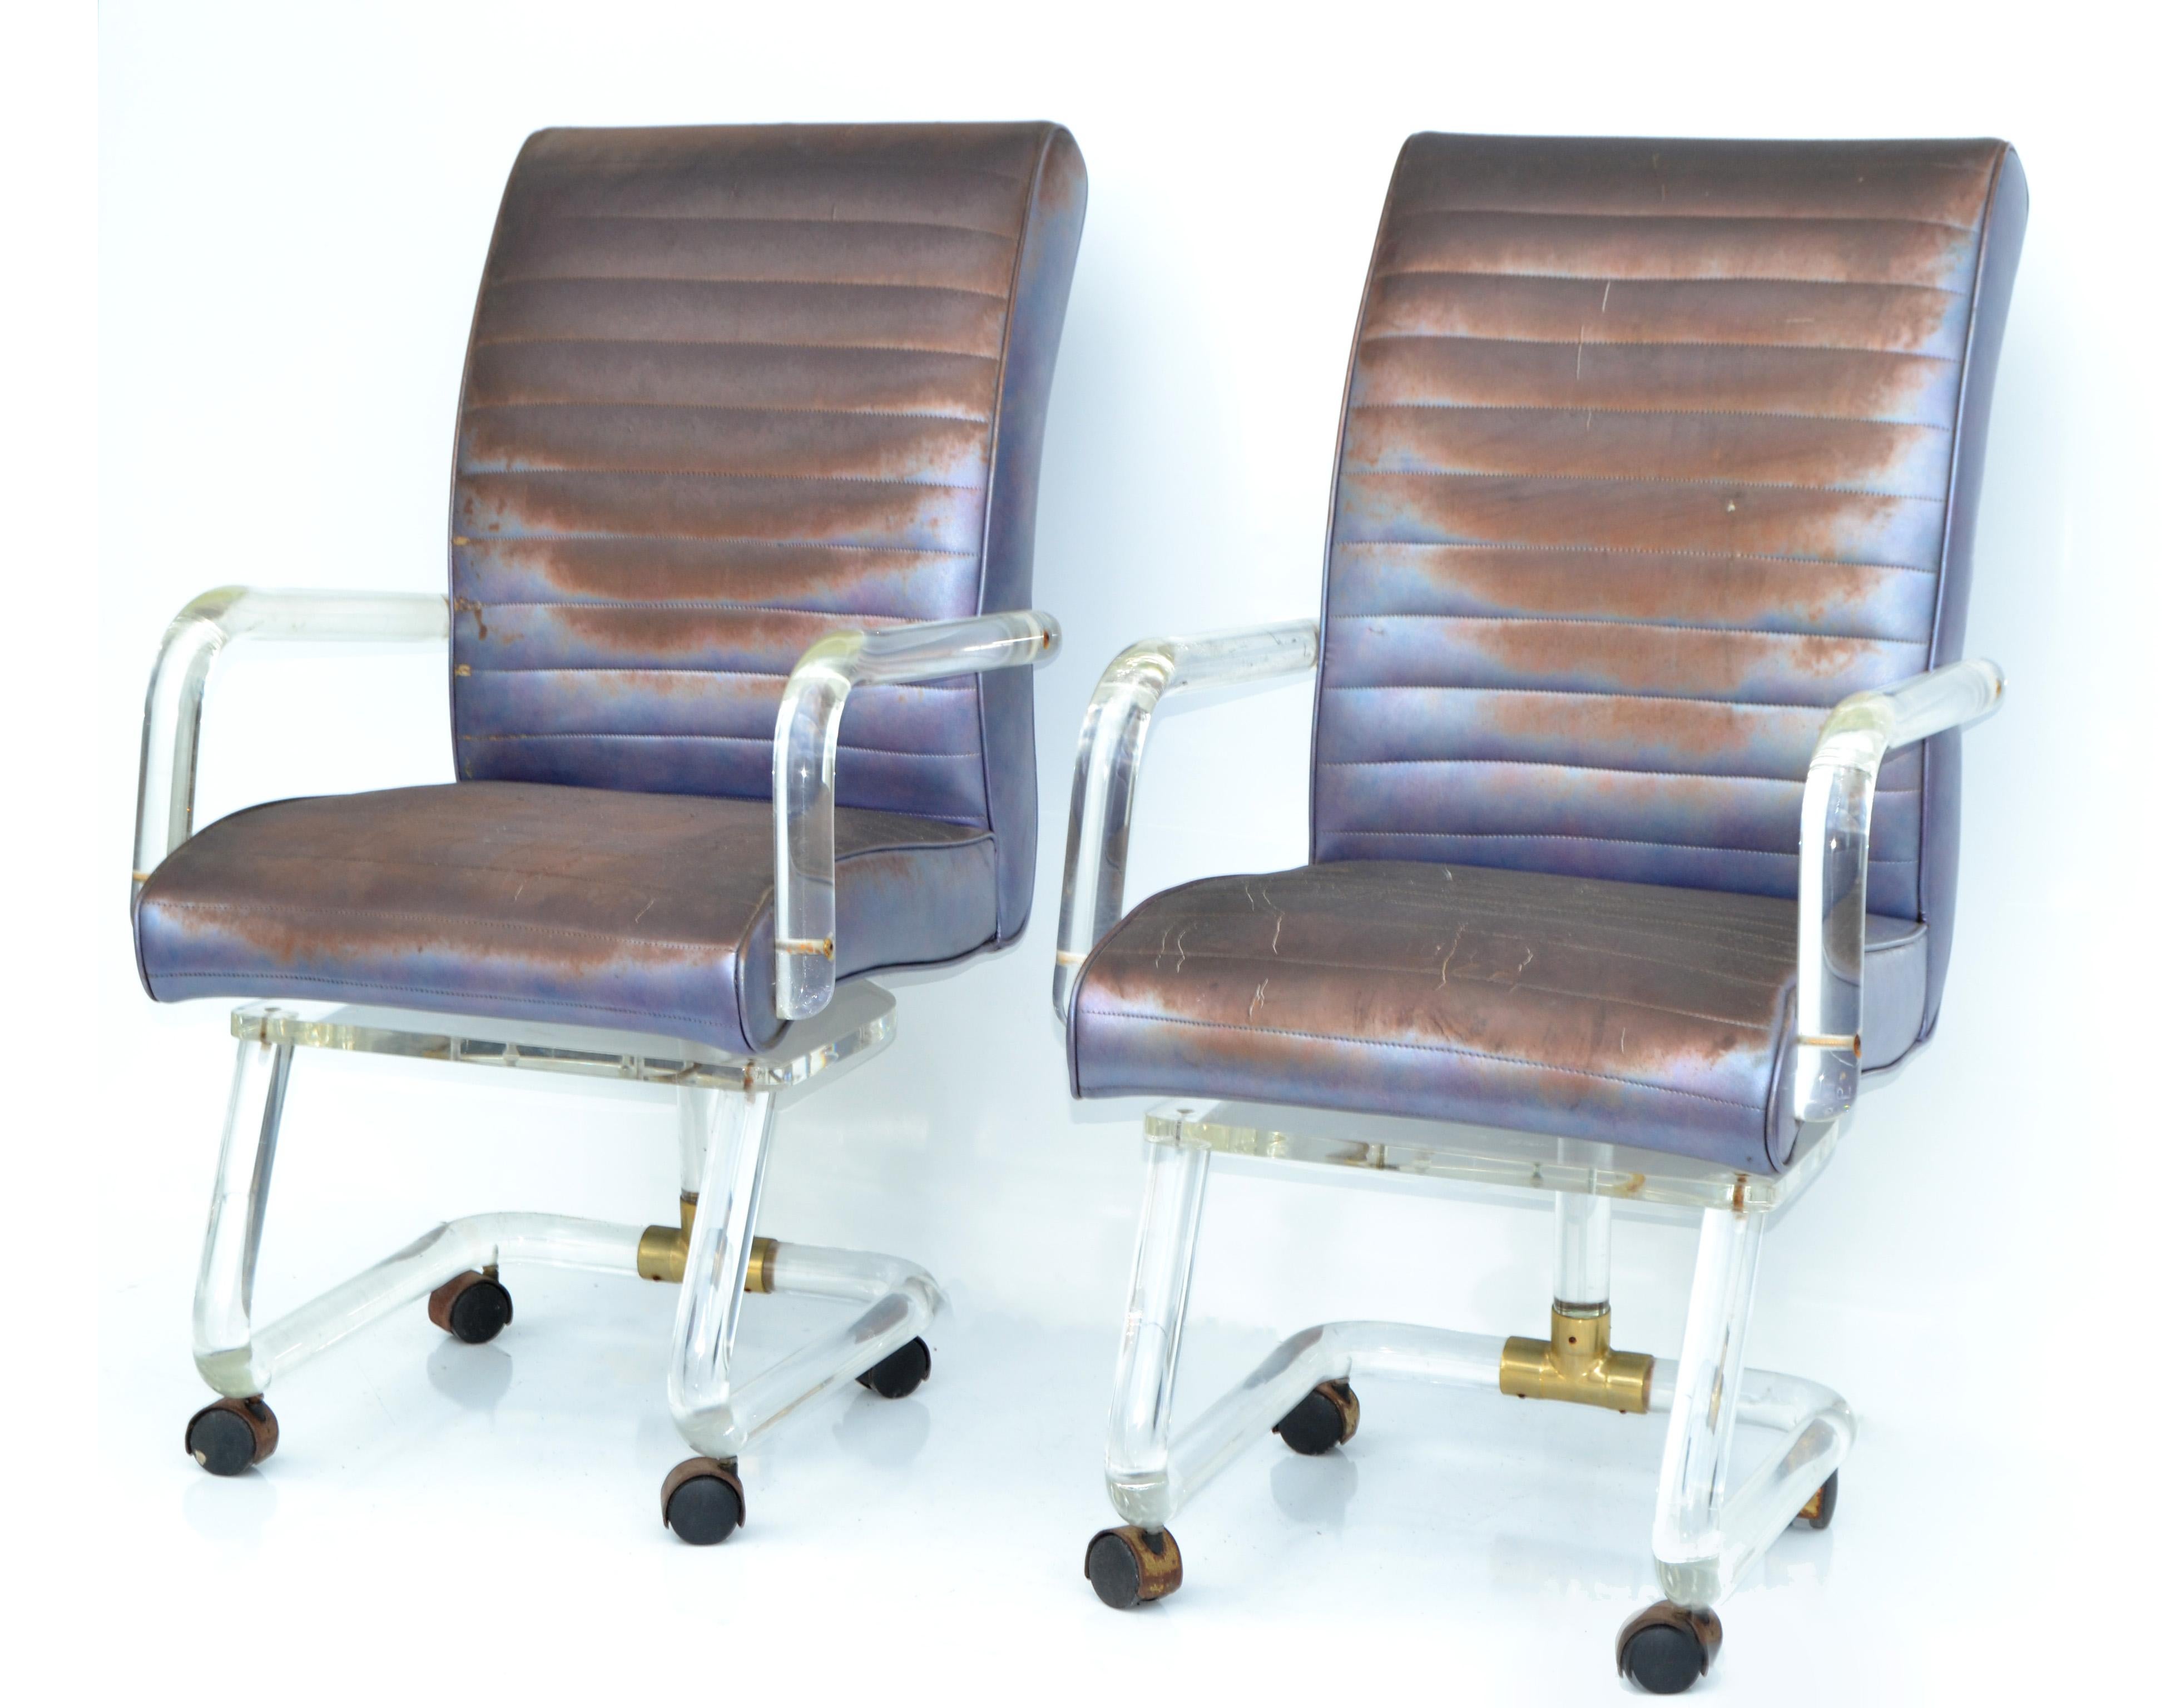 Mid-Century Modern pair of lion in frost lucite dining, office chairs or armchairs on casters with brass detailing made in America in the late 20th century.
The original distressed looking Upholstery in electric blue needs to be redone.
The Lucite